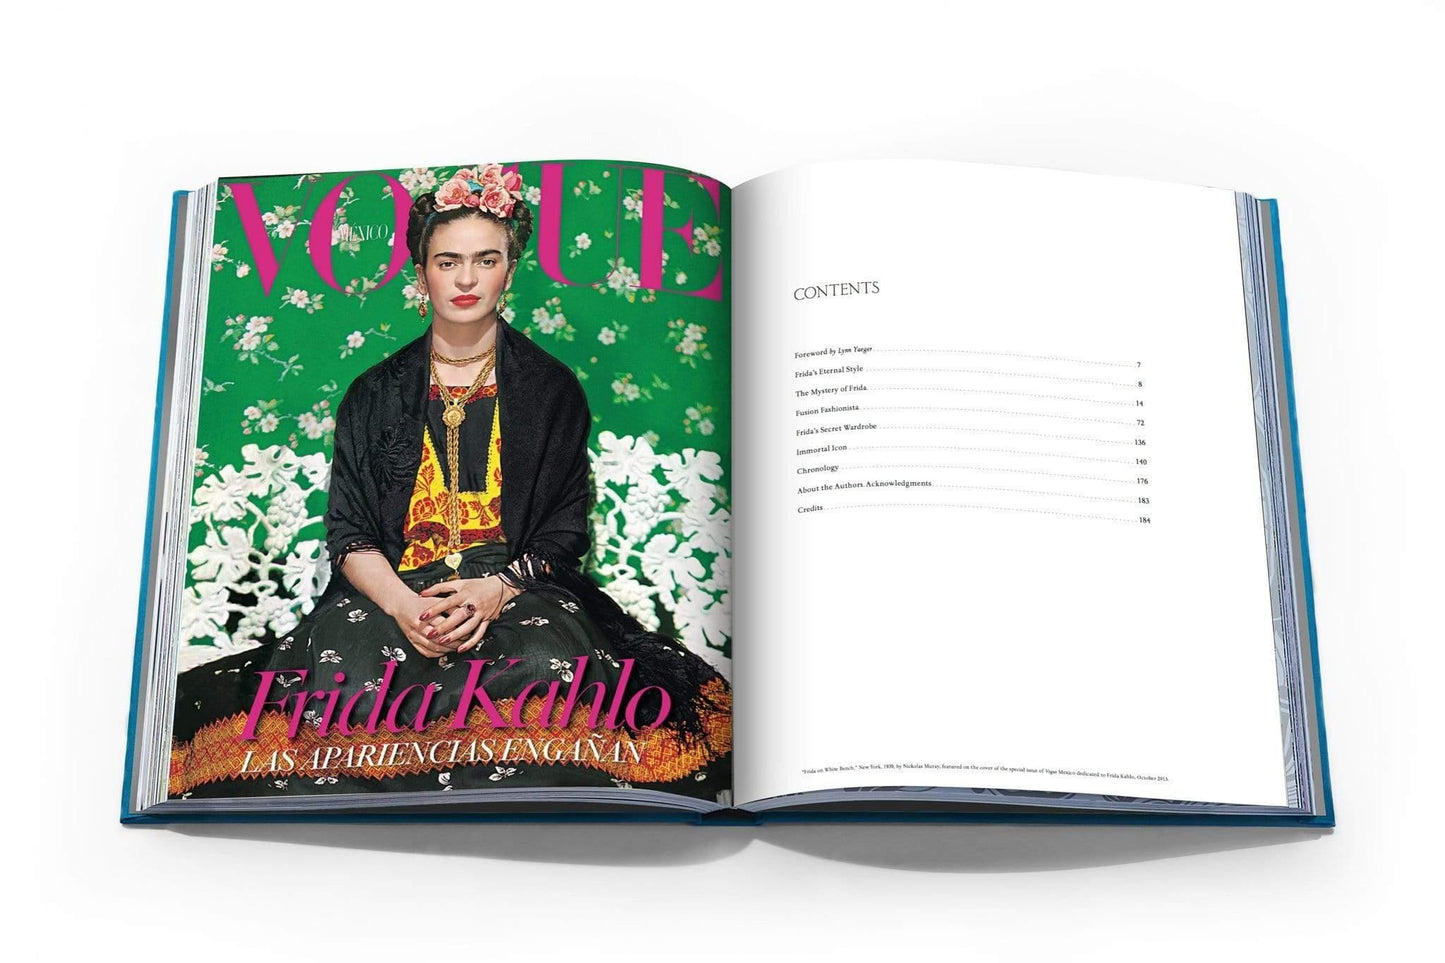 Frida Kahlo: Fashion as the Art of Being - Luxury Books